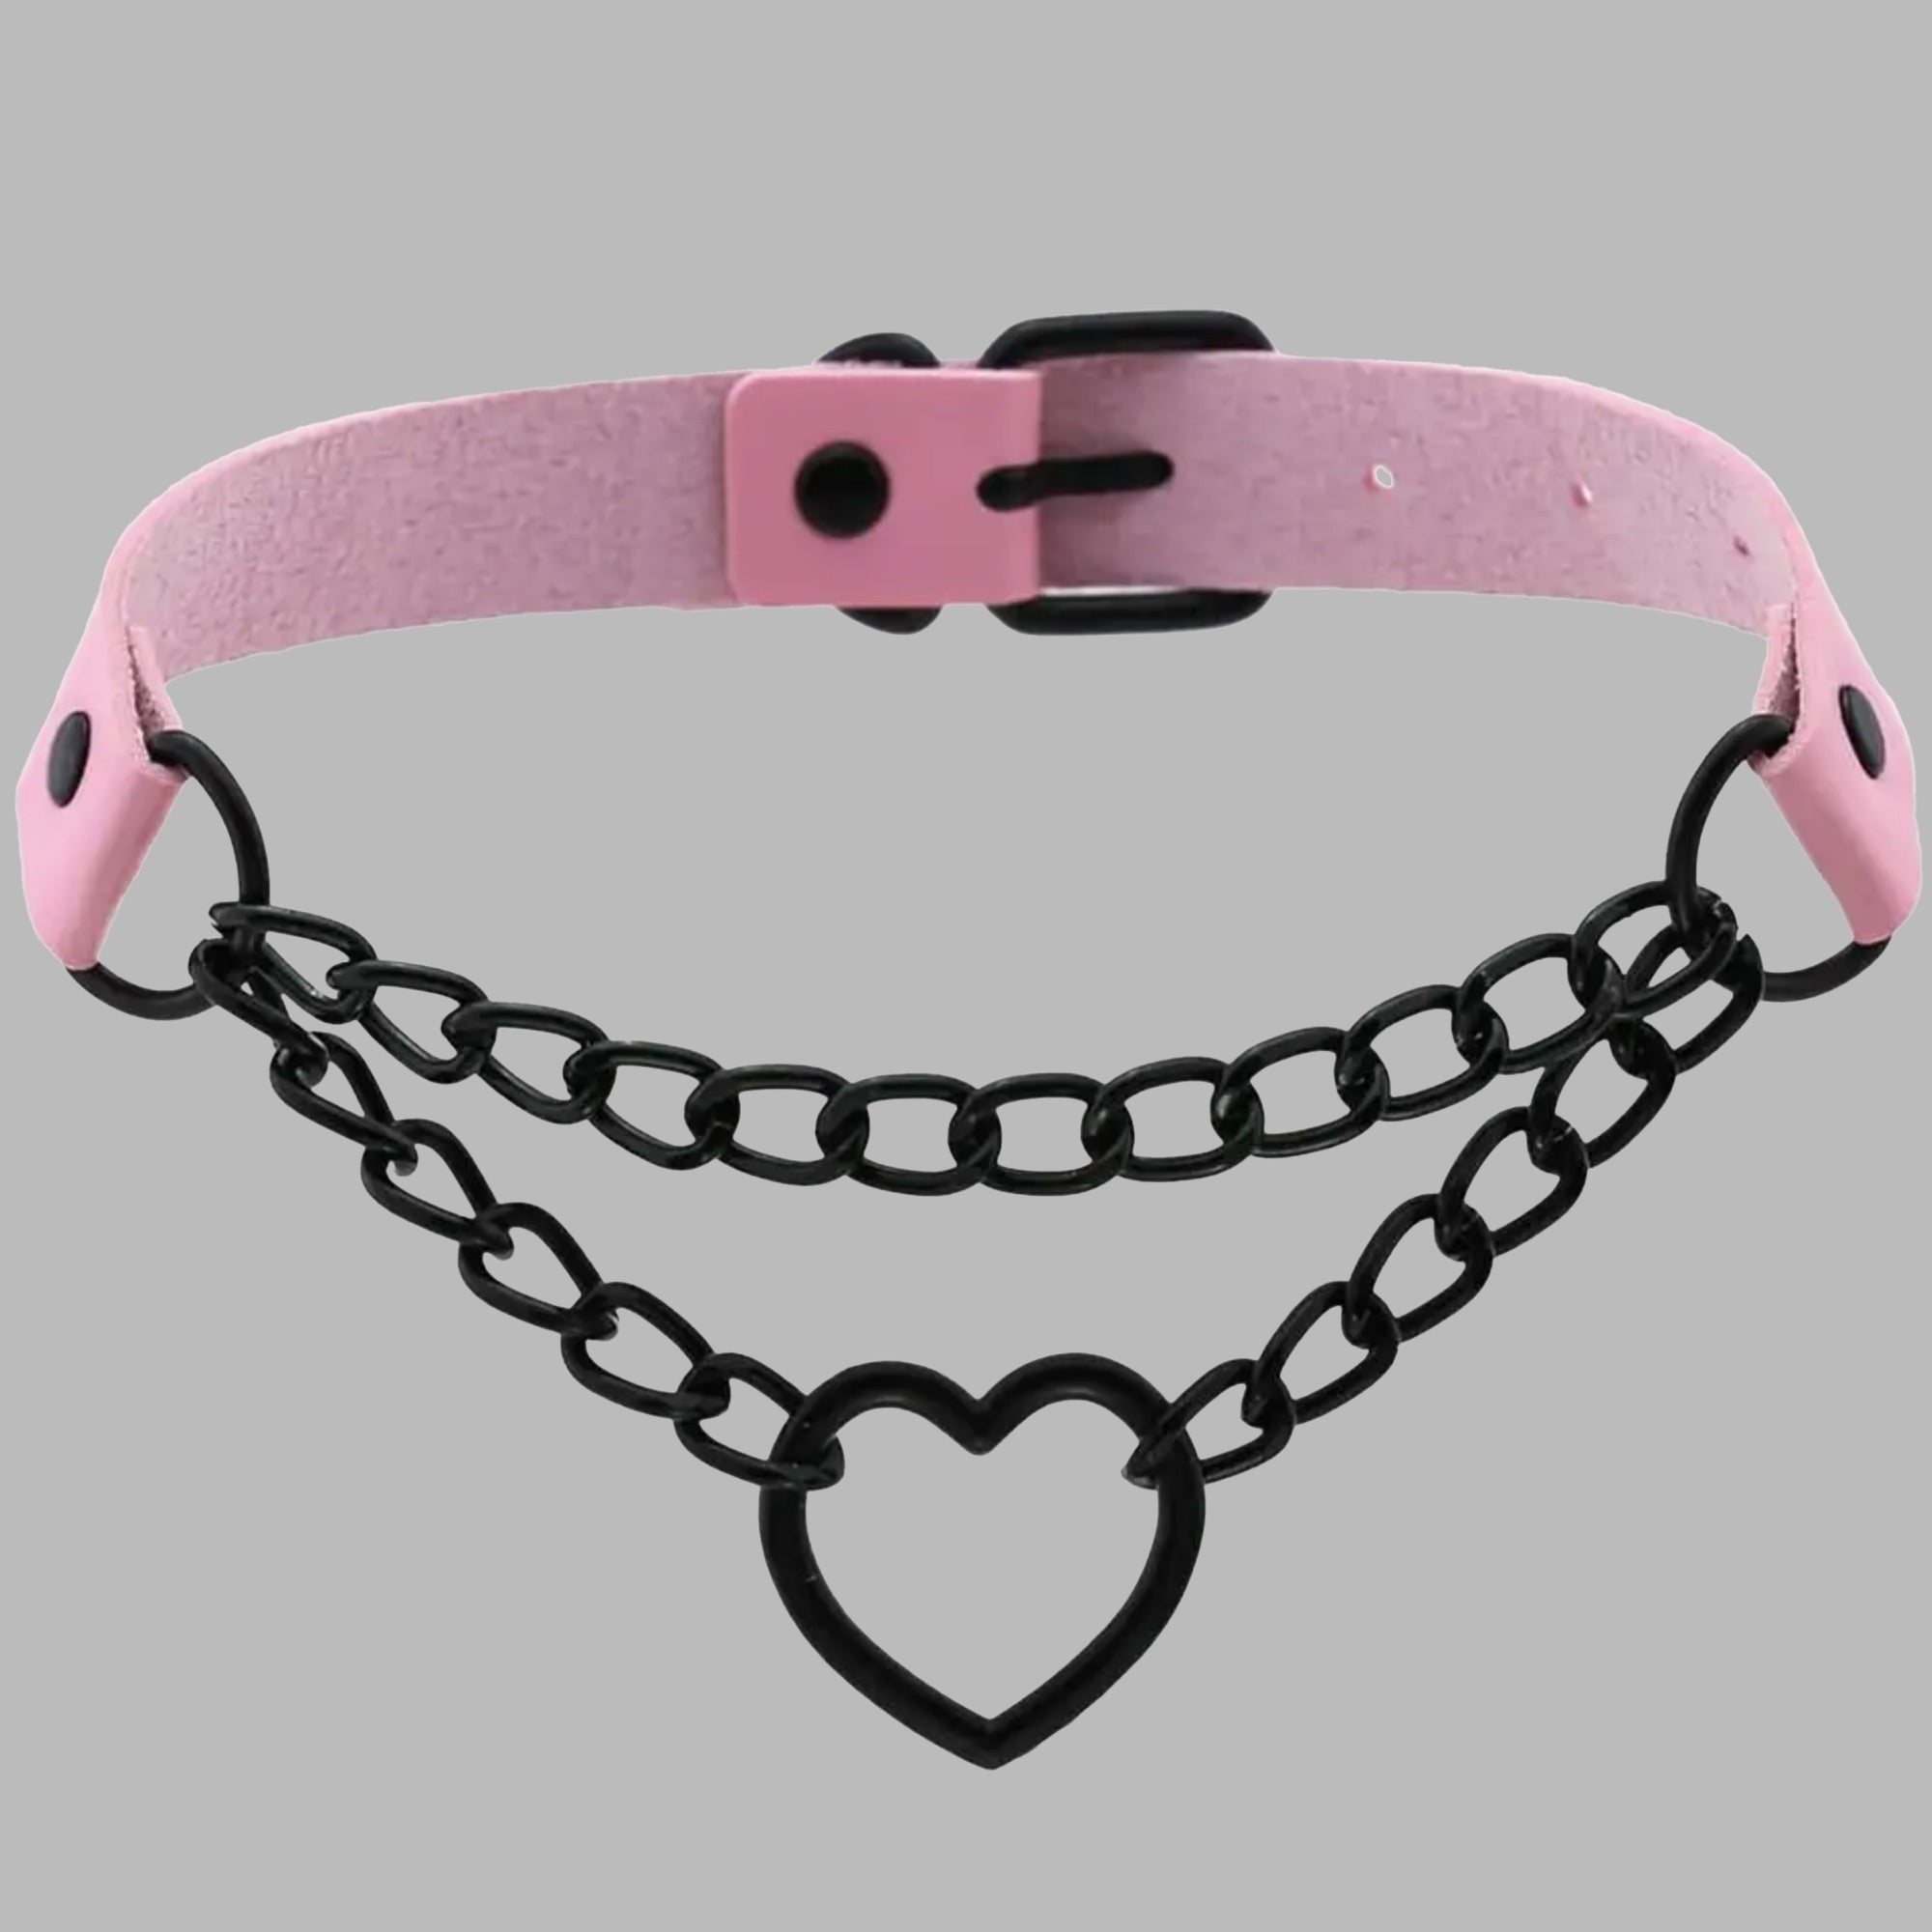 Chained Heart Choker - Baby Pink & Black